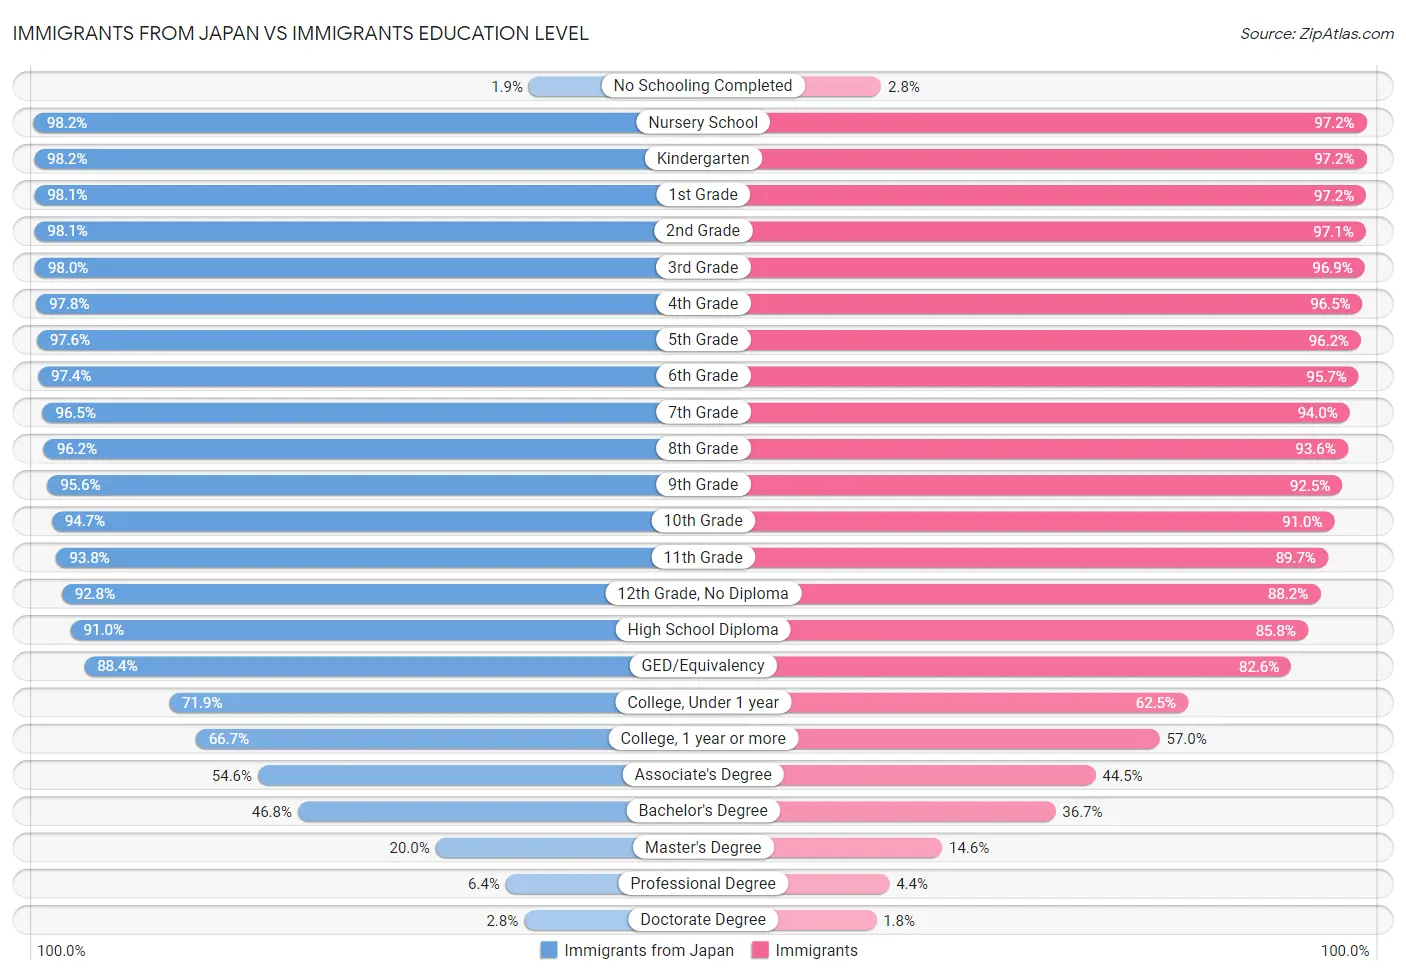 Immigrants from Japan vs Immigrants Education Level